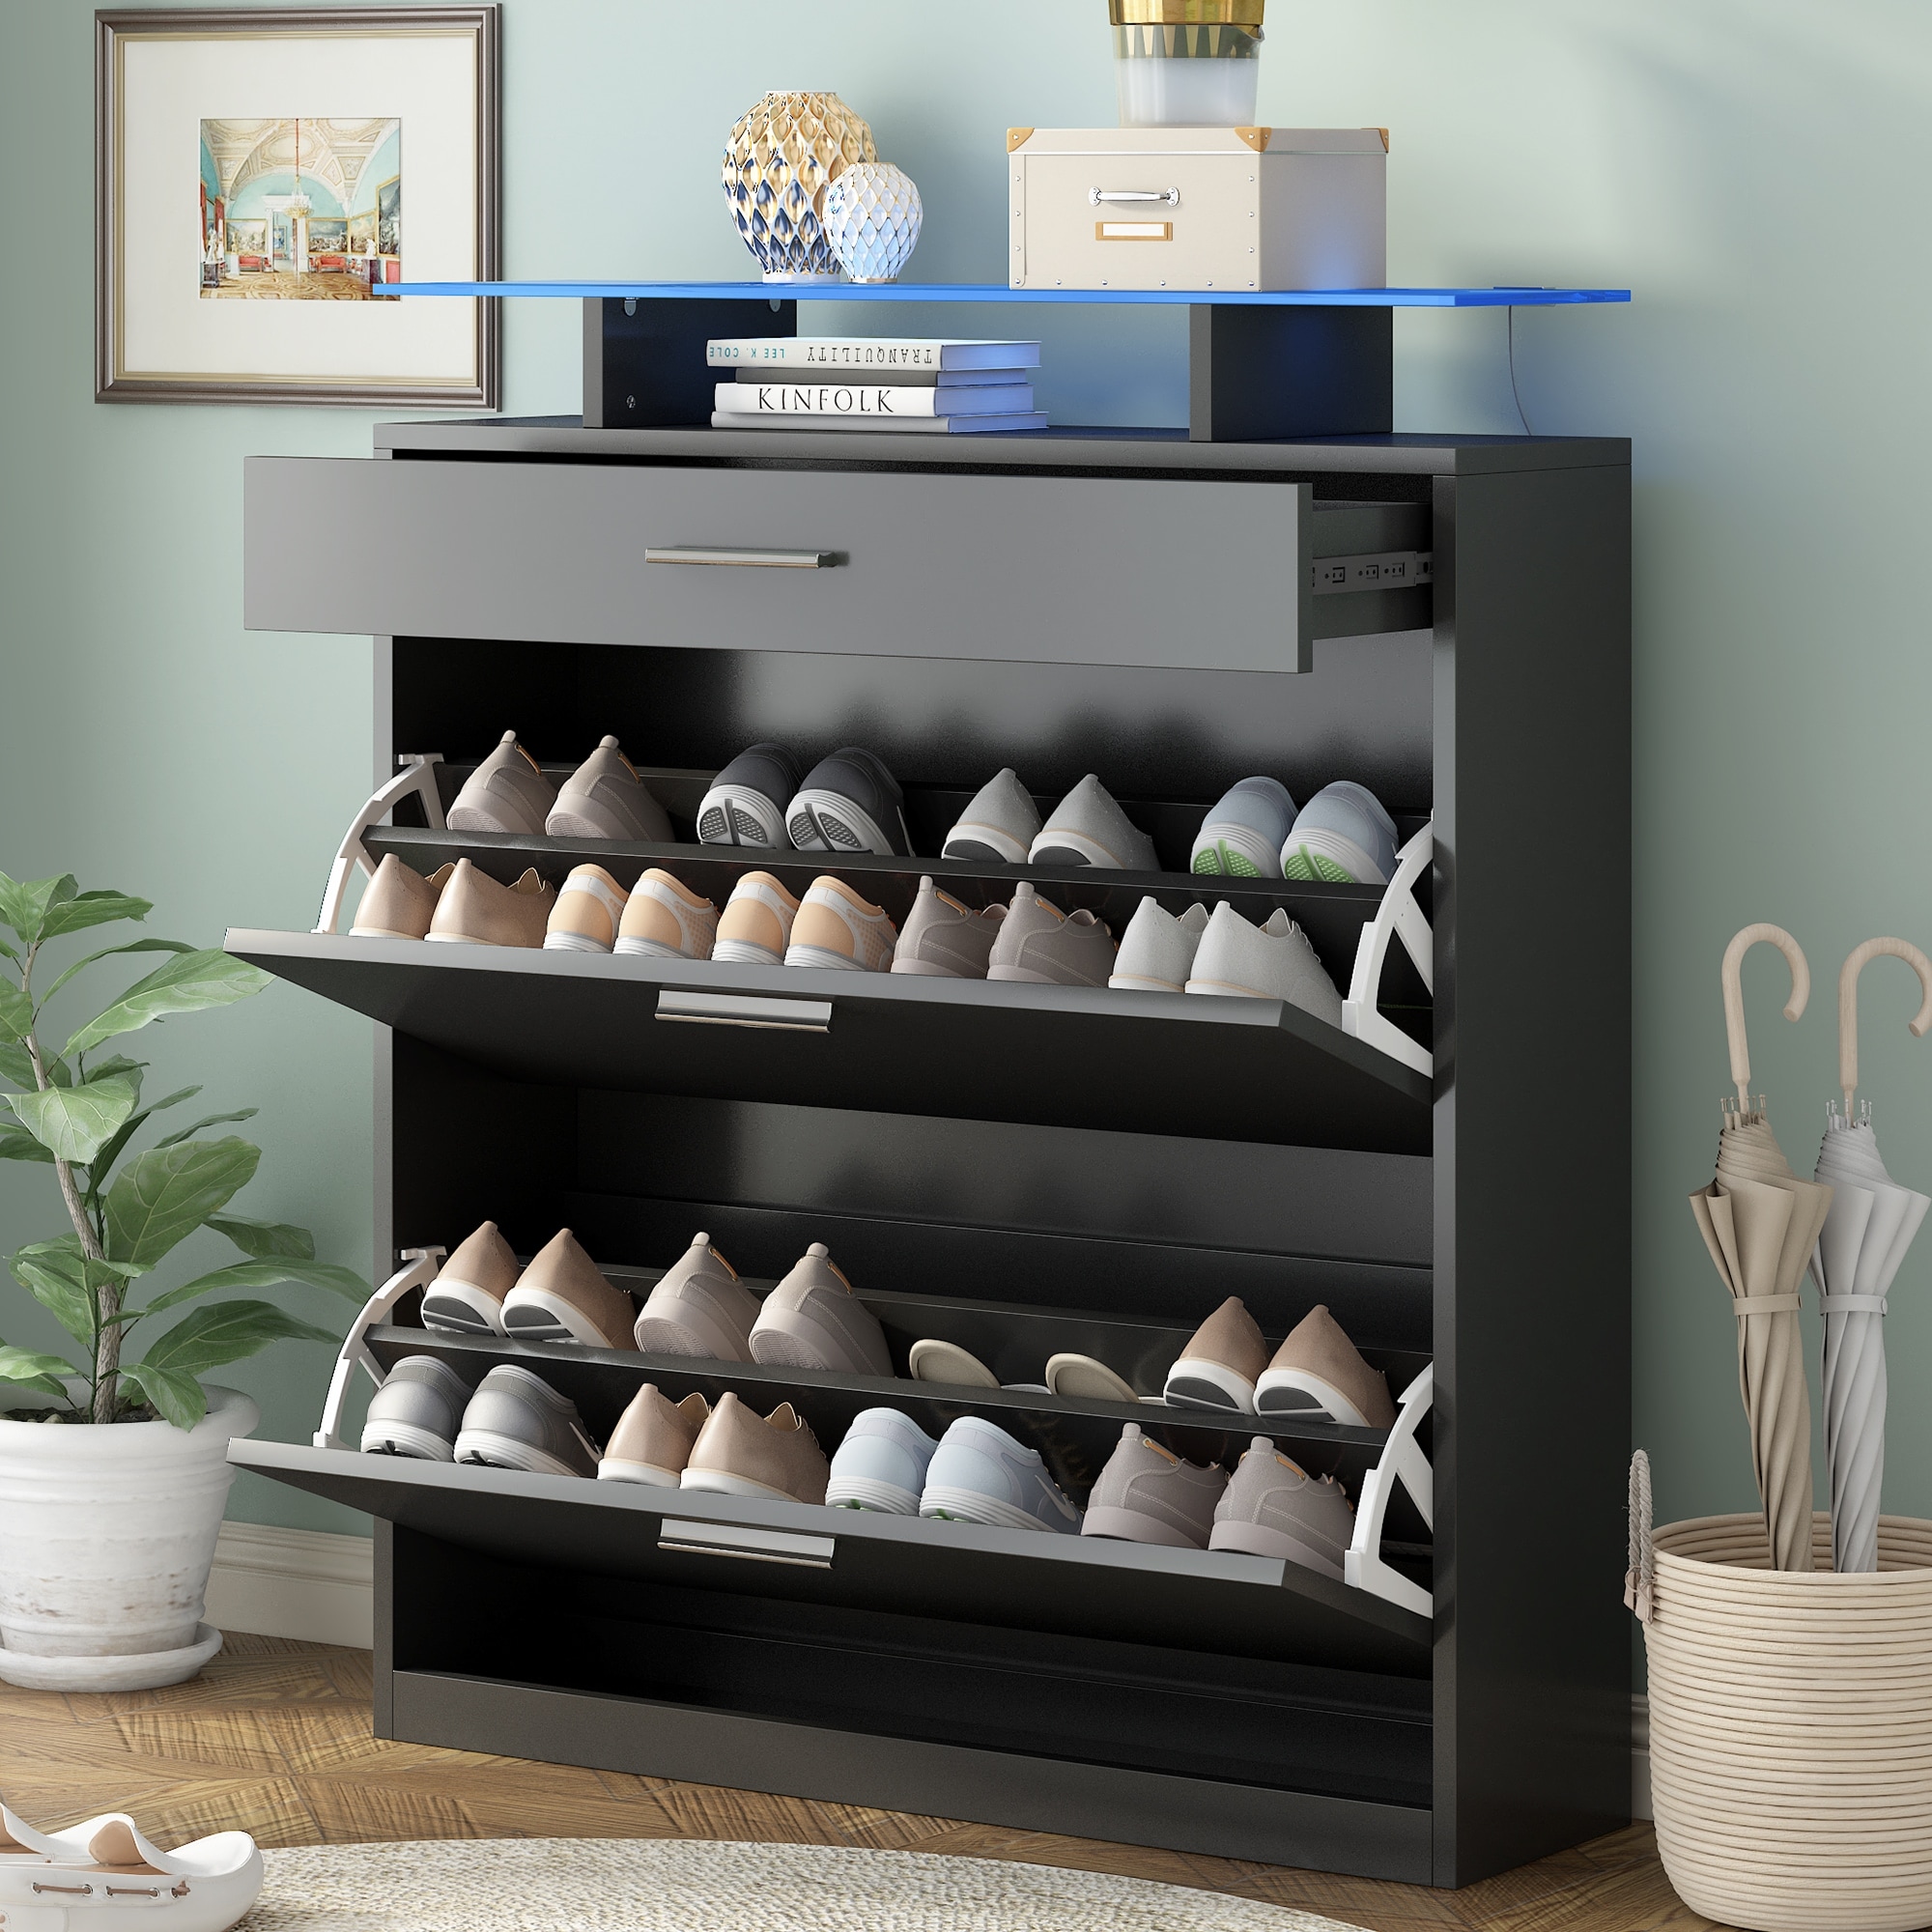 https://ak1.ostkcdn.com/images/products/is/images/direct/7aea7d32ab5153c597569ac6e78e5cc730a8cc64/Slim-Shoe-Storage-Cabinet-with-Glass-Top-and-LED-Light.jpg